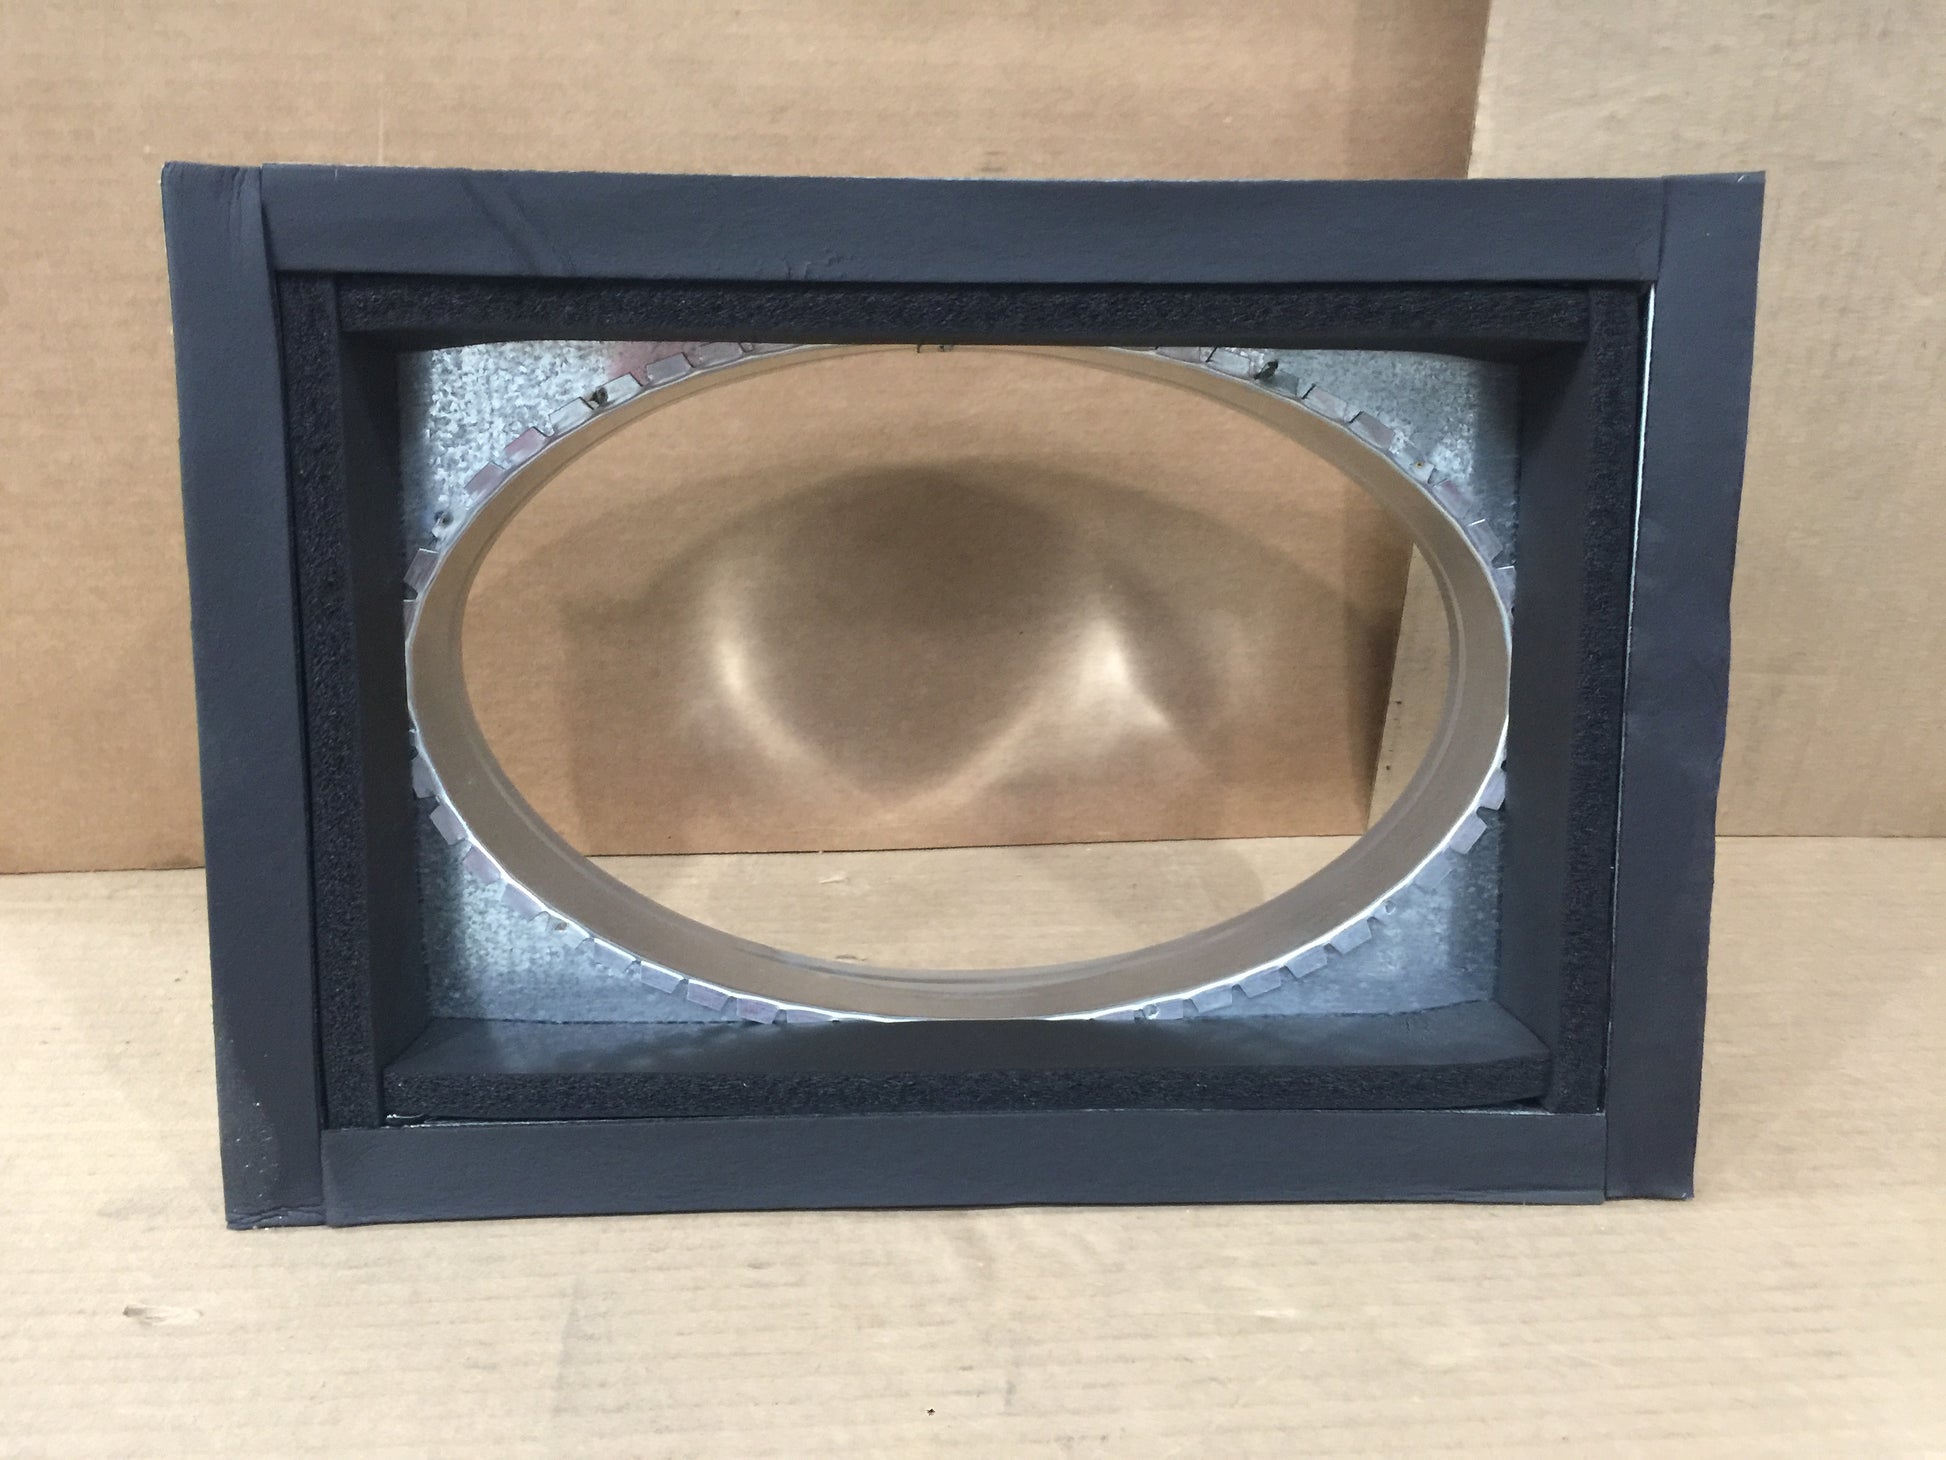 RETURN AIR ADAPTER FOR 12"  ROUND FLEX DUCT; FOR M1218 SERIES AIR HANDLER